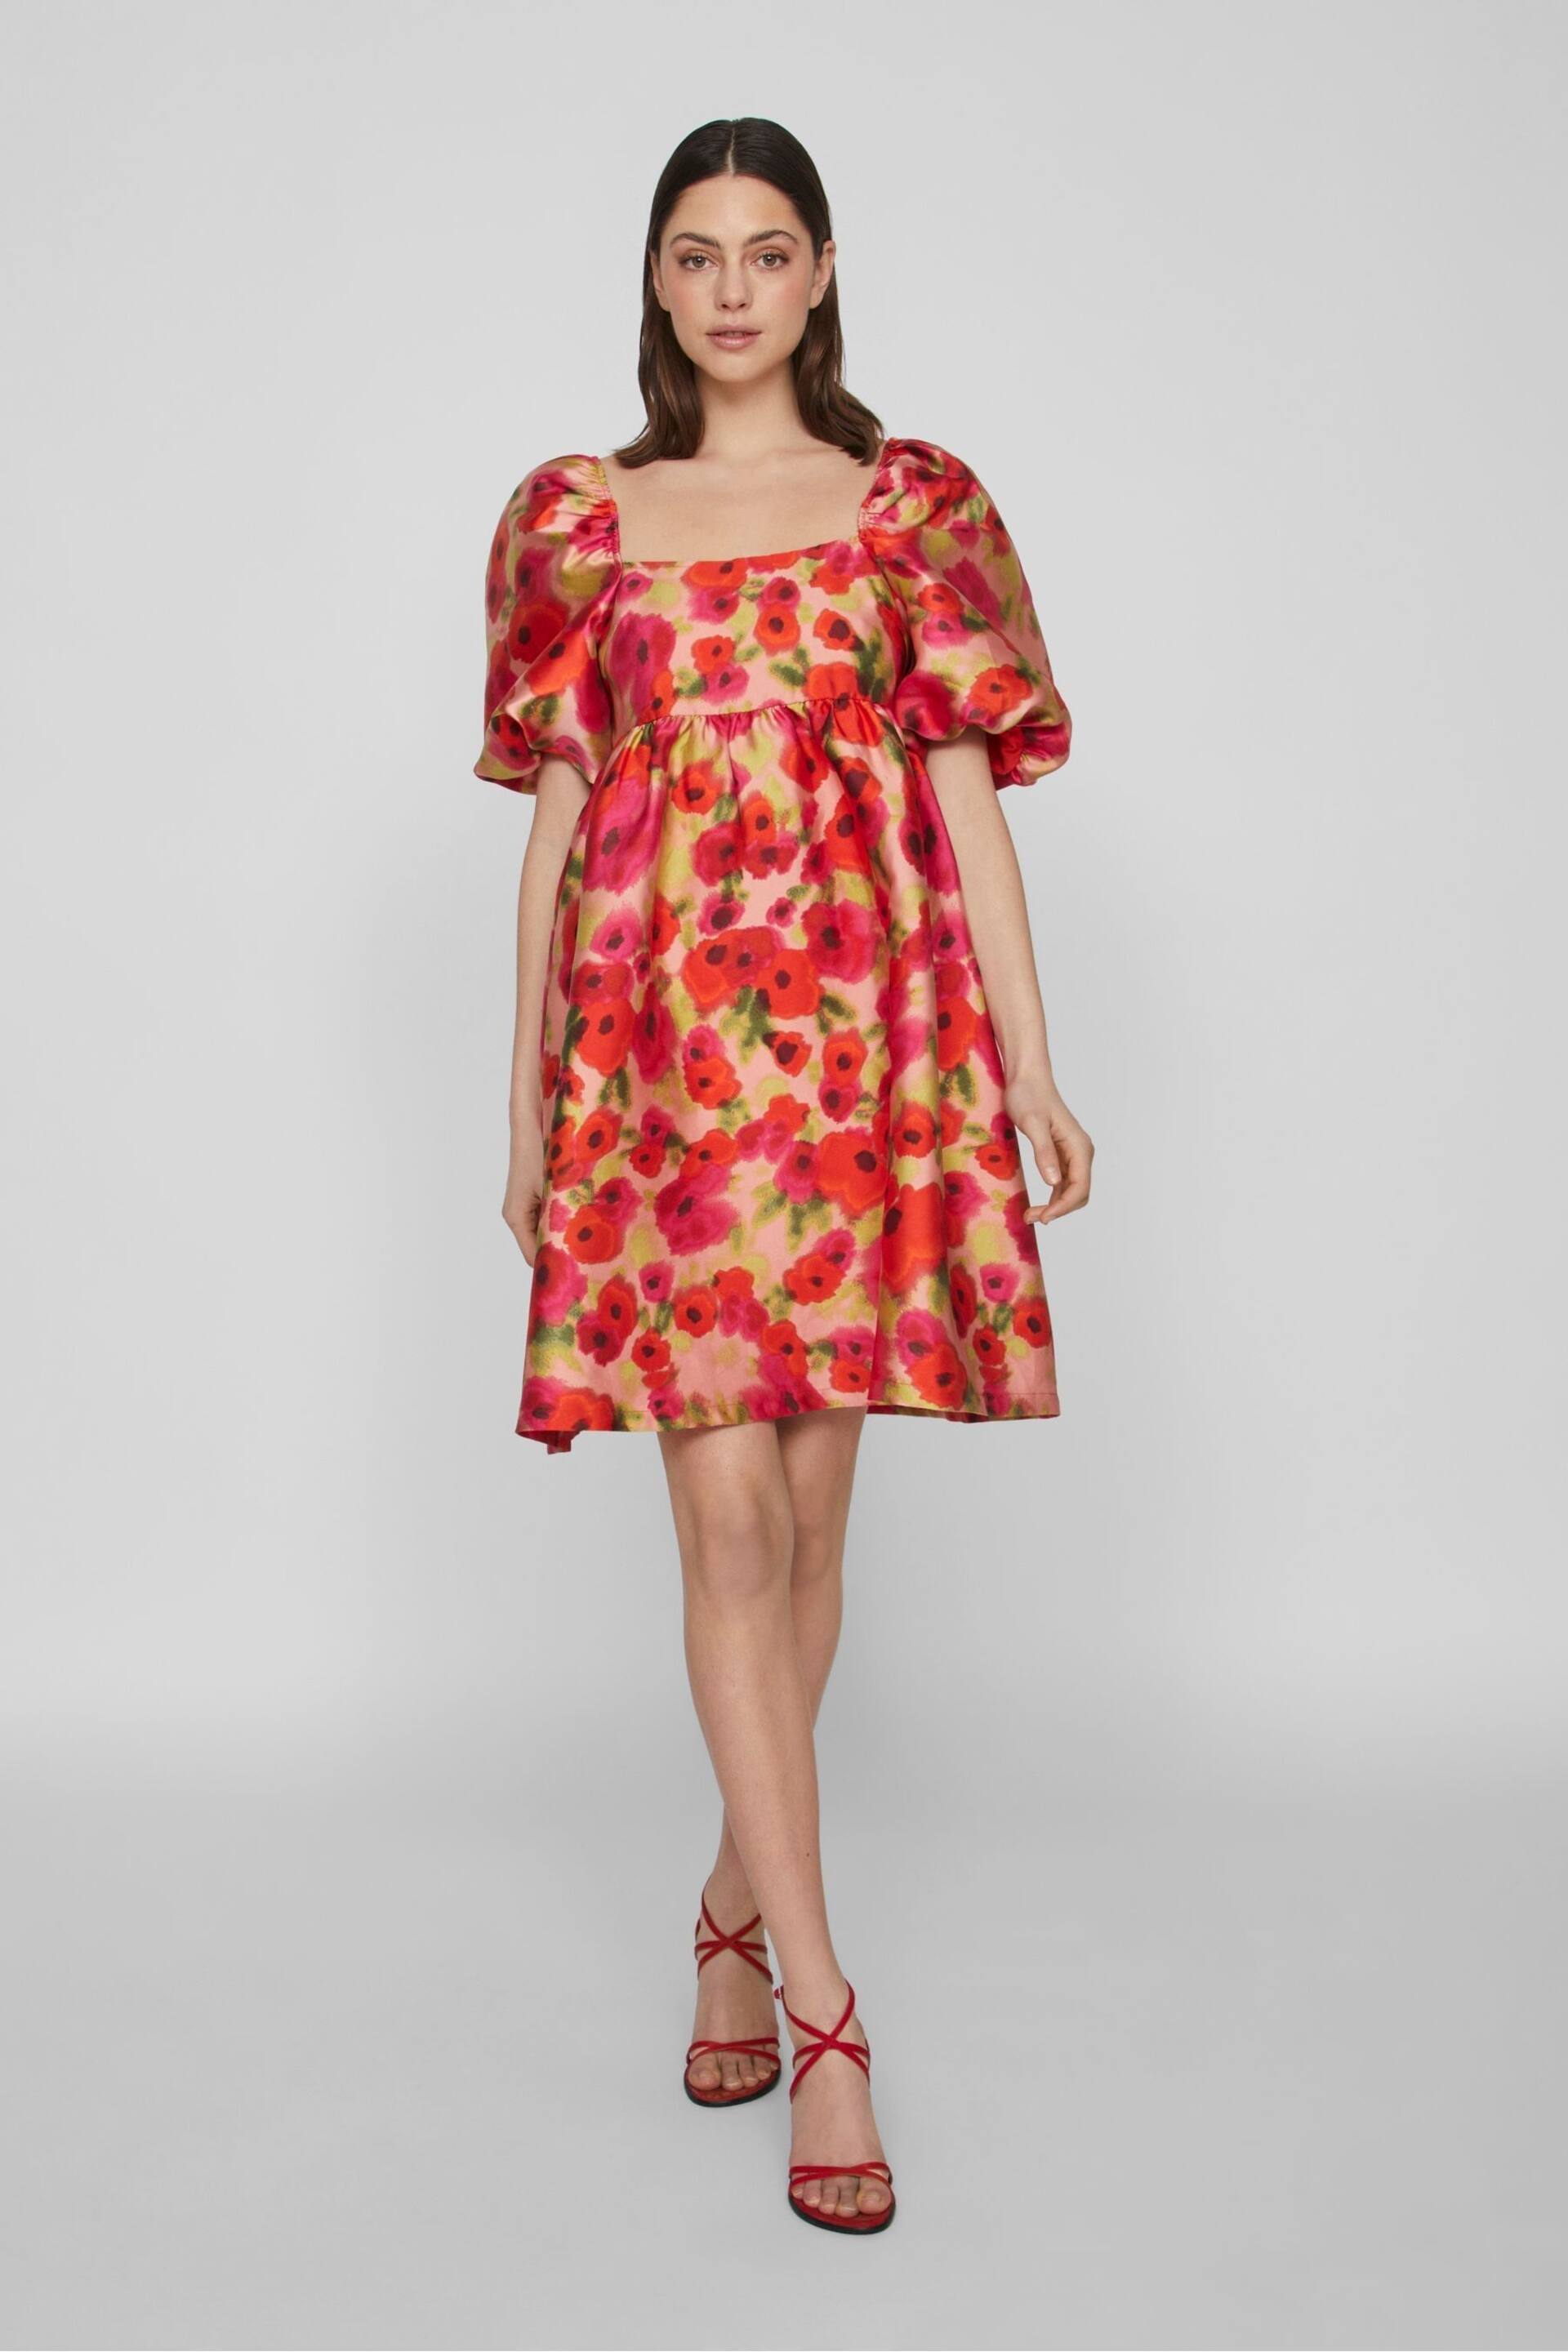 VILA Red Floral Baroque Puff Sleeve Mini Occasion Dress - Image 3 of 7